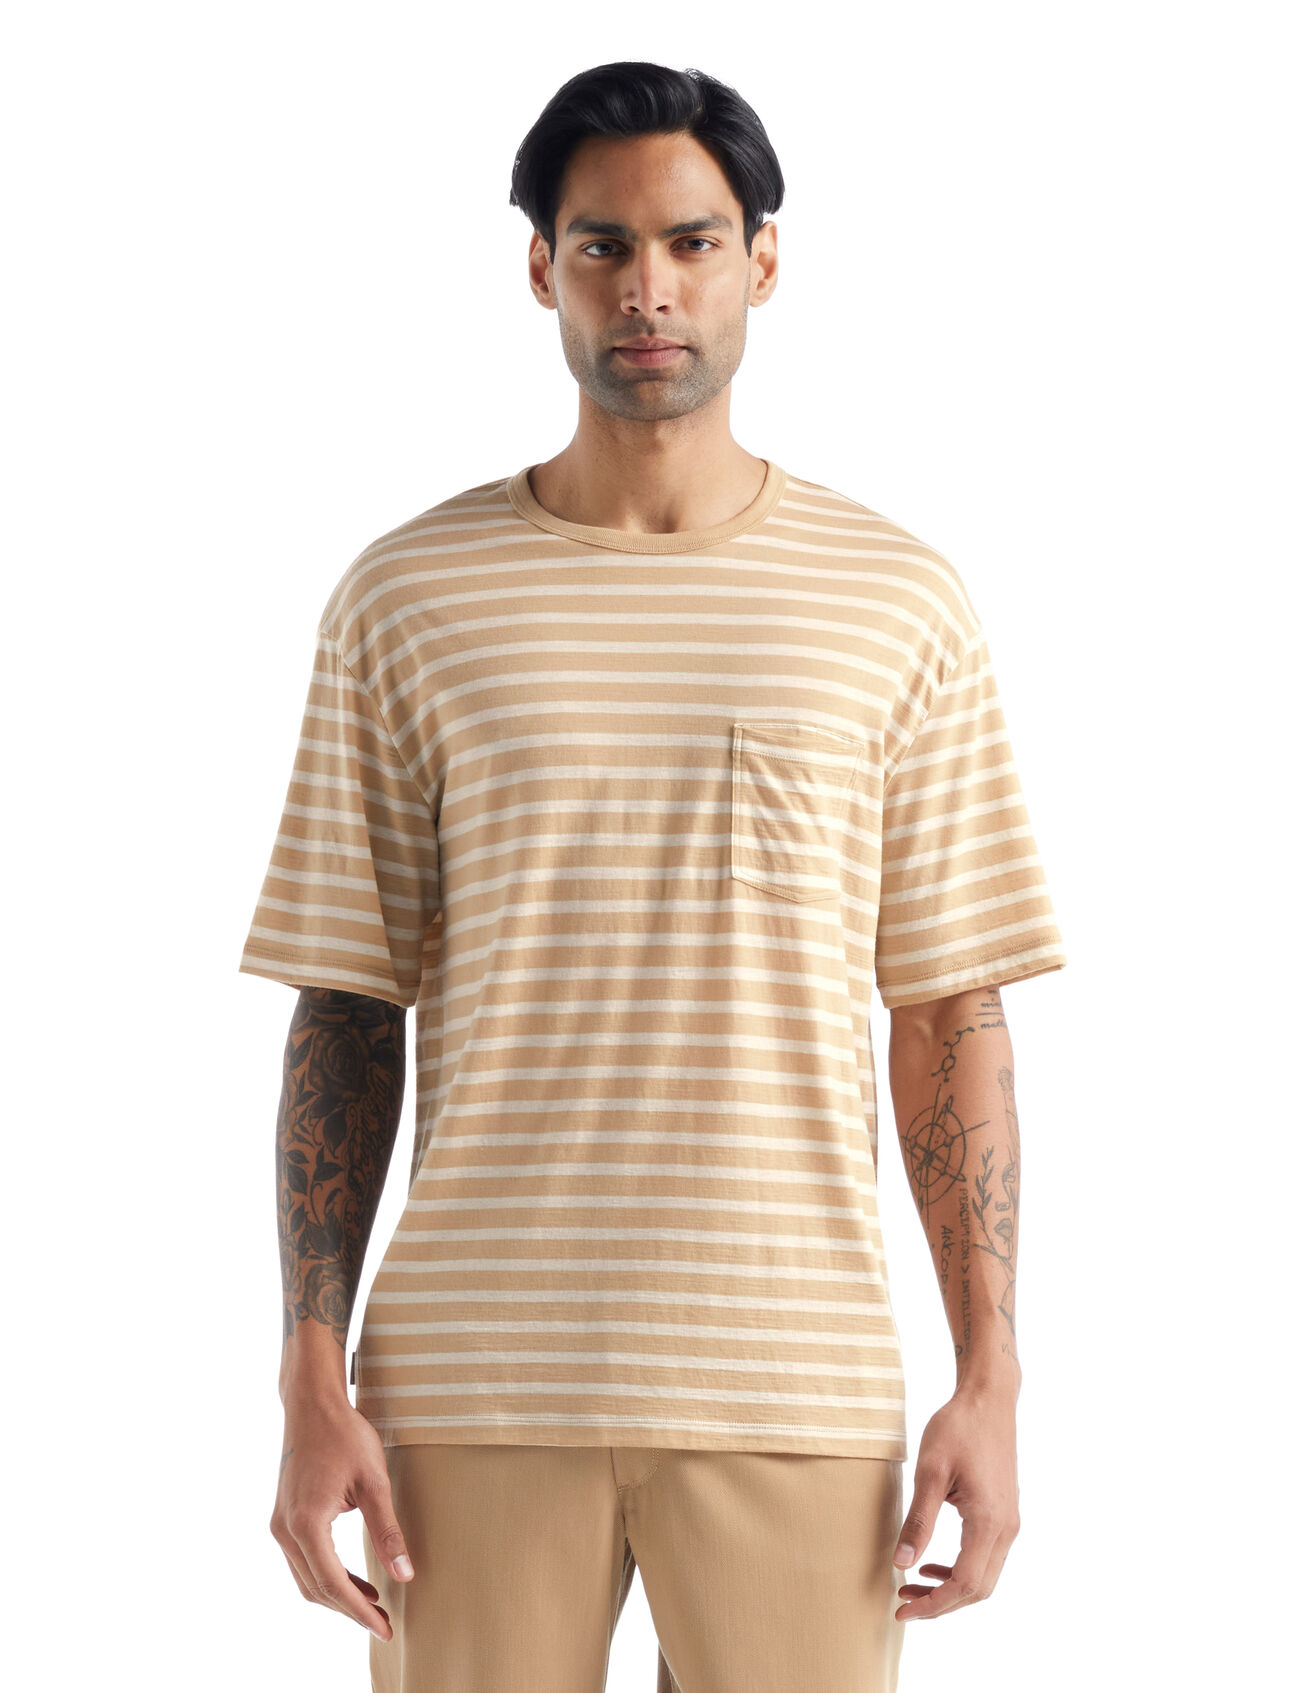 Mens Merino Granary Short Sleeve Pocket Stripe T-Shirt A classic striped pocket tee with a relaxed fit and soft, breathable, 100% merino wool fabric, the Granary Short Sleeve Pocket Tee Stripe is all about everyday, all-natural comfort.